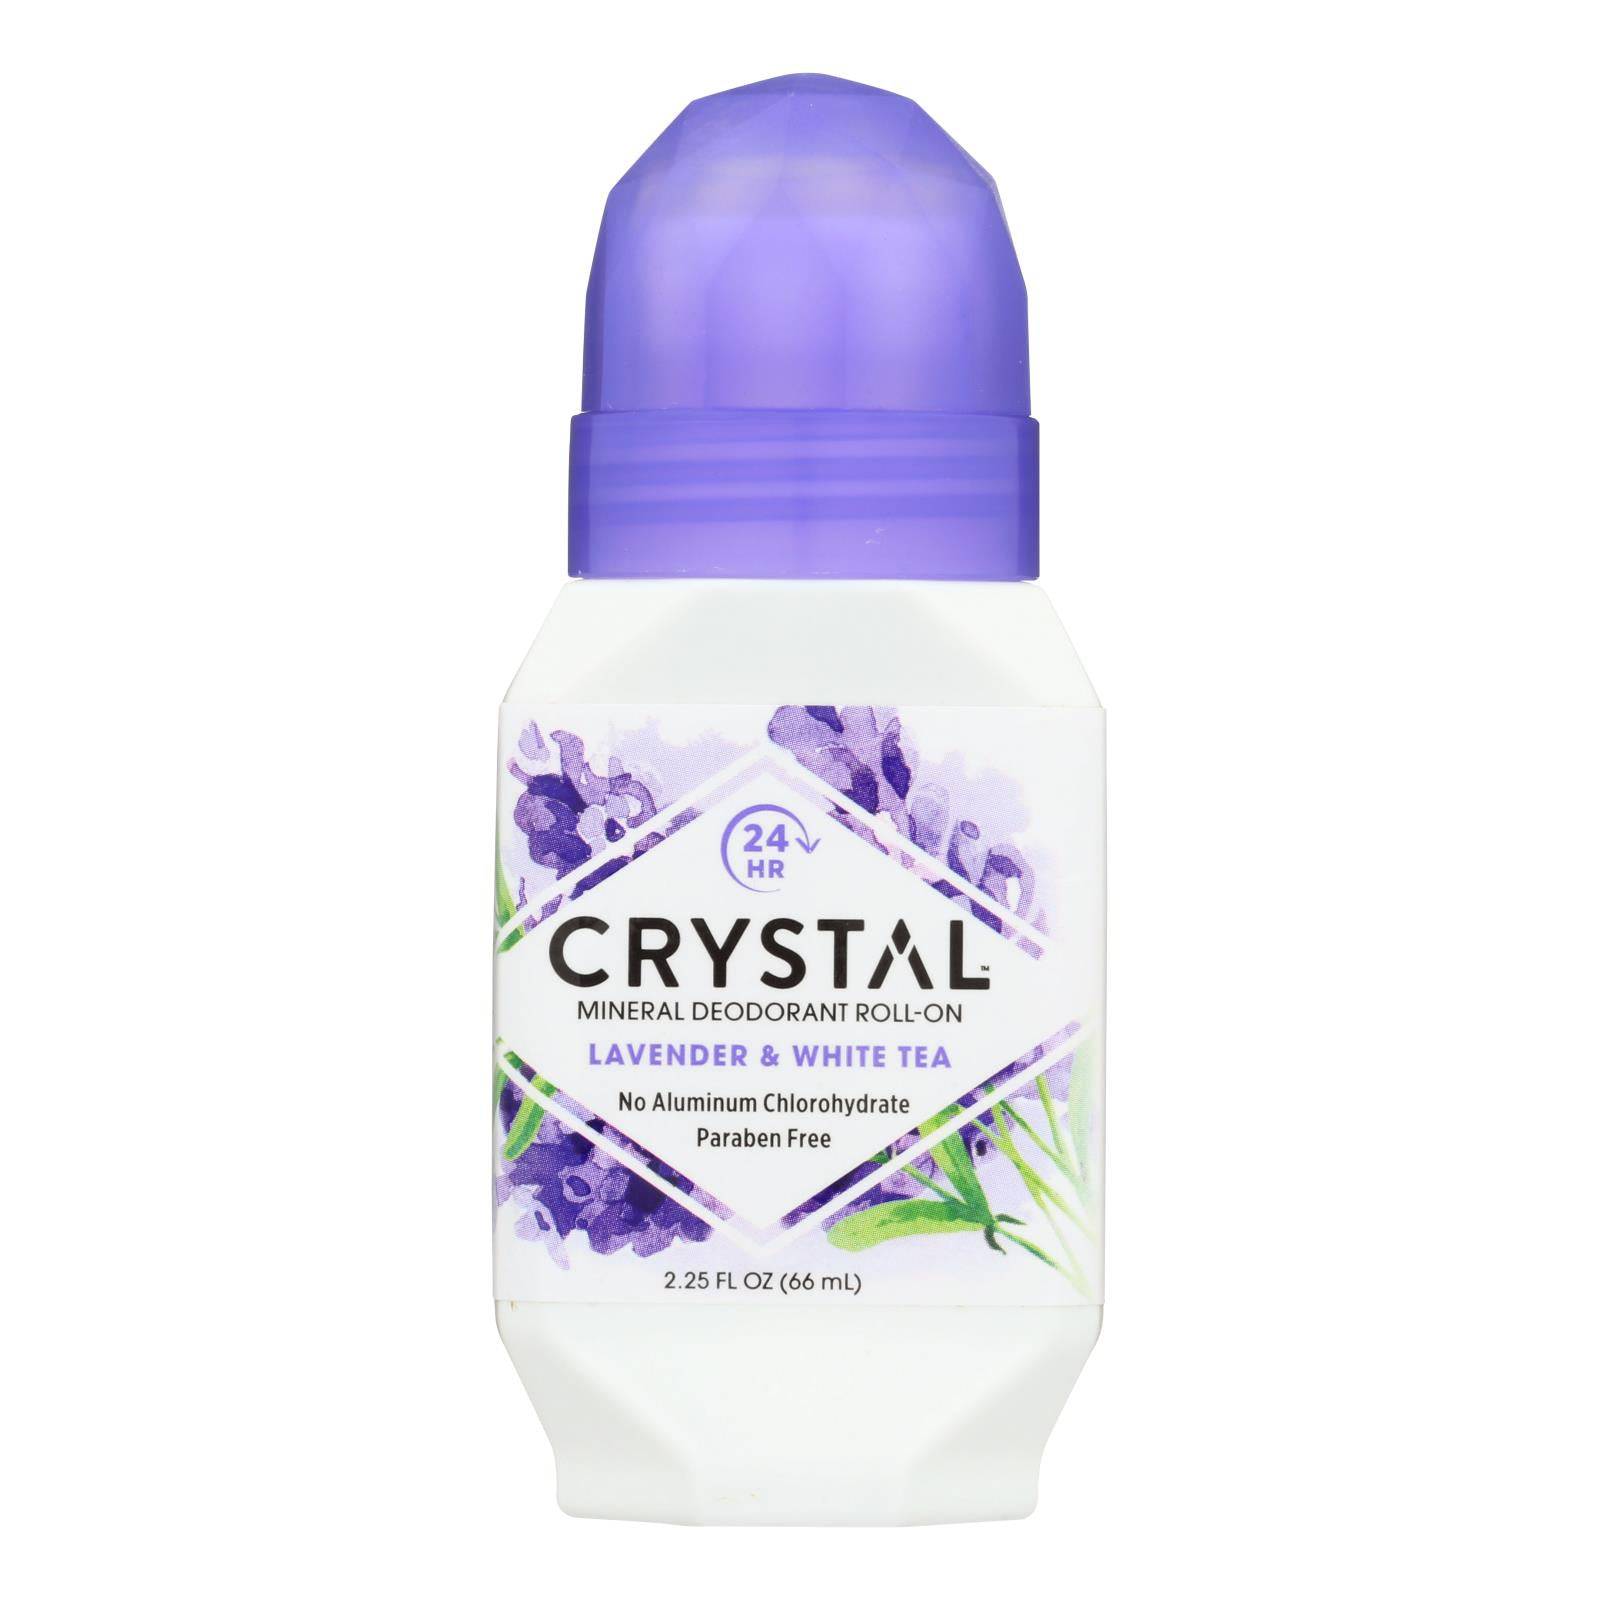 Buy Crystal Essence Roll On Deodorant Lavender And White Tea - 2.25 Fl Oz  at OnlyNaturals.us